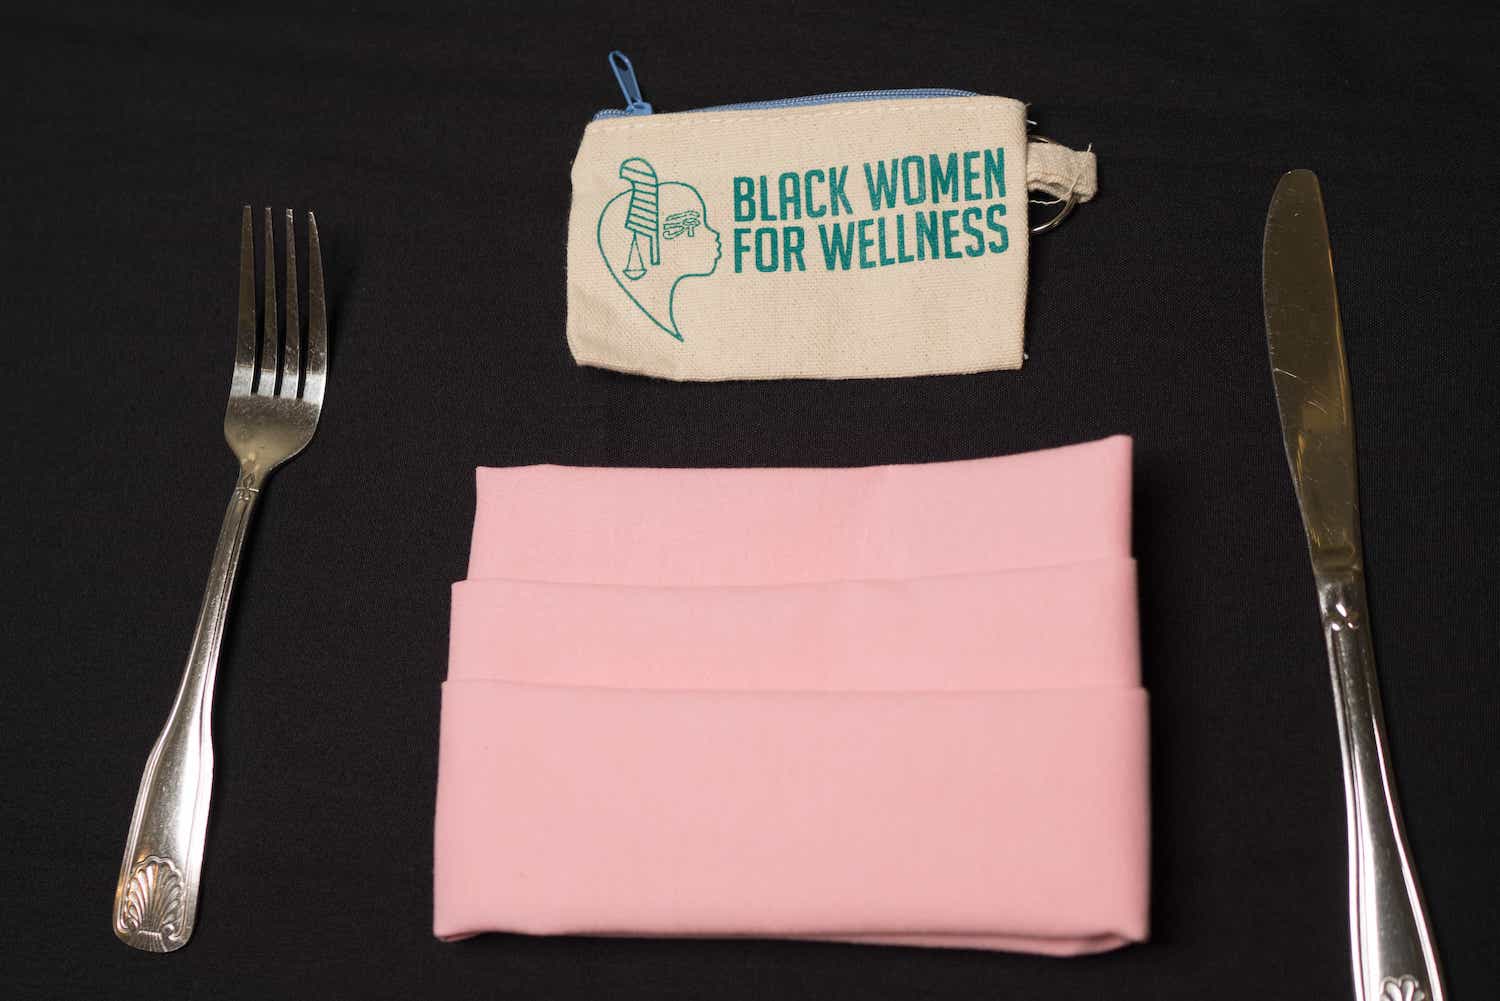 Black Women for Wellness Annual Risqué Breast Health Conference 42